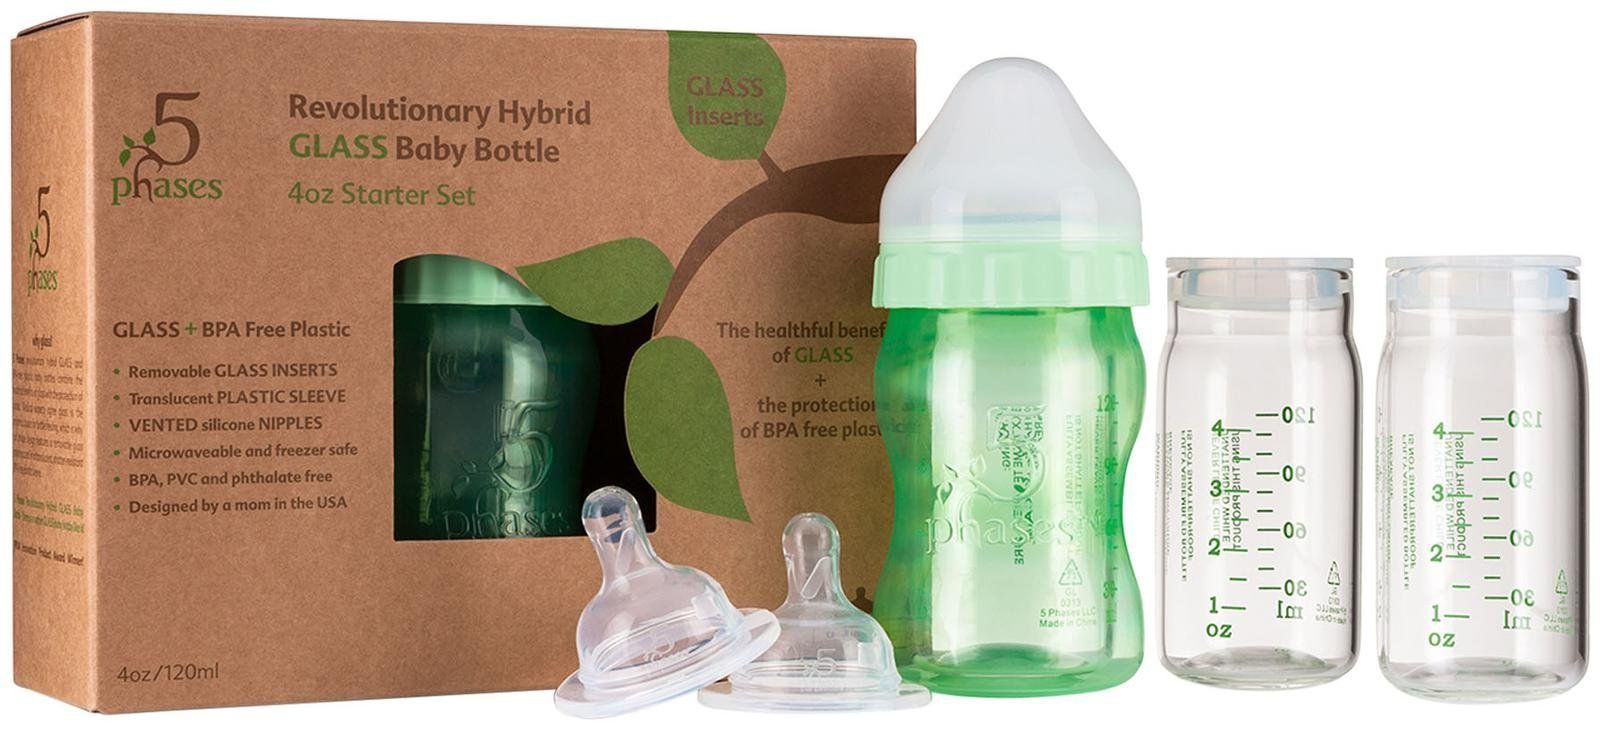 Best glass baby bottles: The 5 Phases bottle is designed to grow with your baby -- even when he's onto solids!